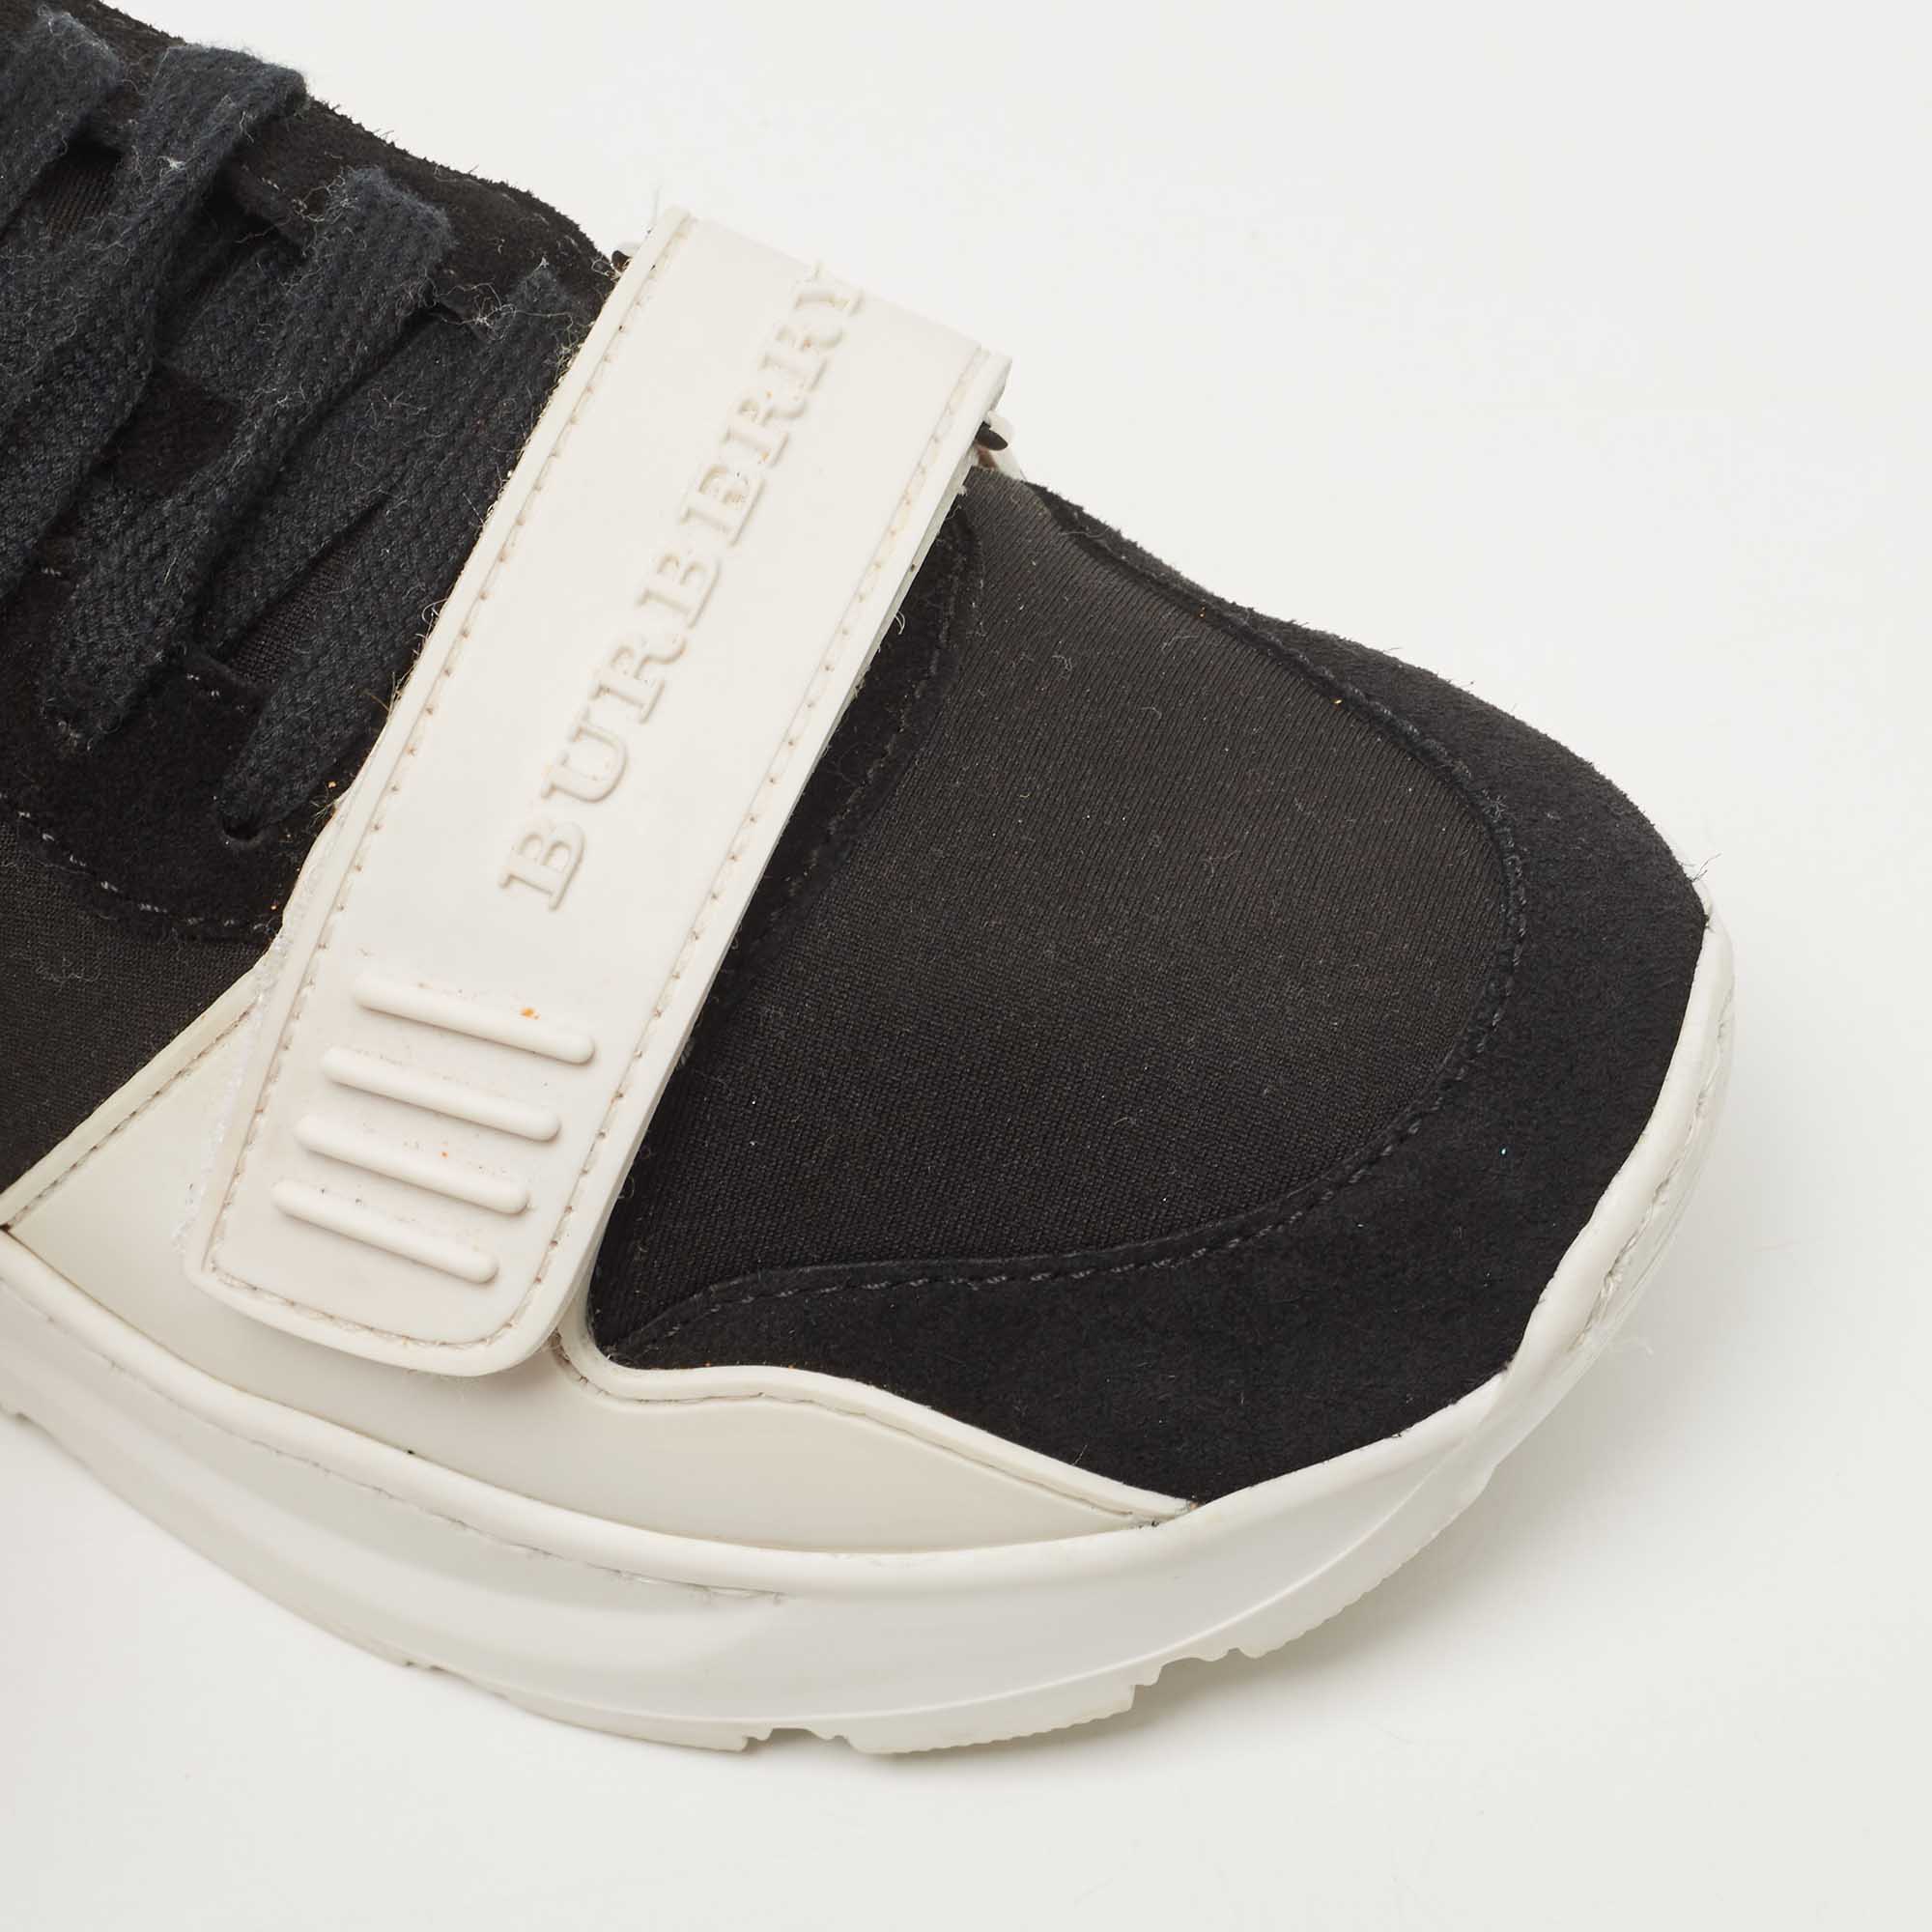 Burberry Black Neoprene And Suede Ramsey Sneakers Size 36